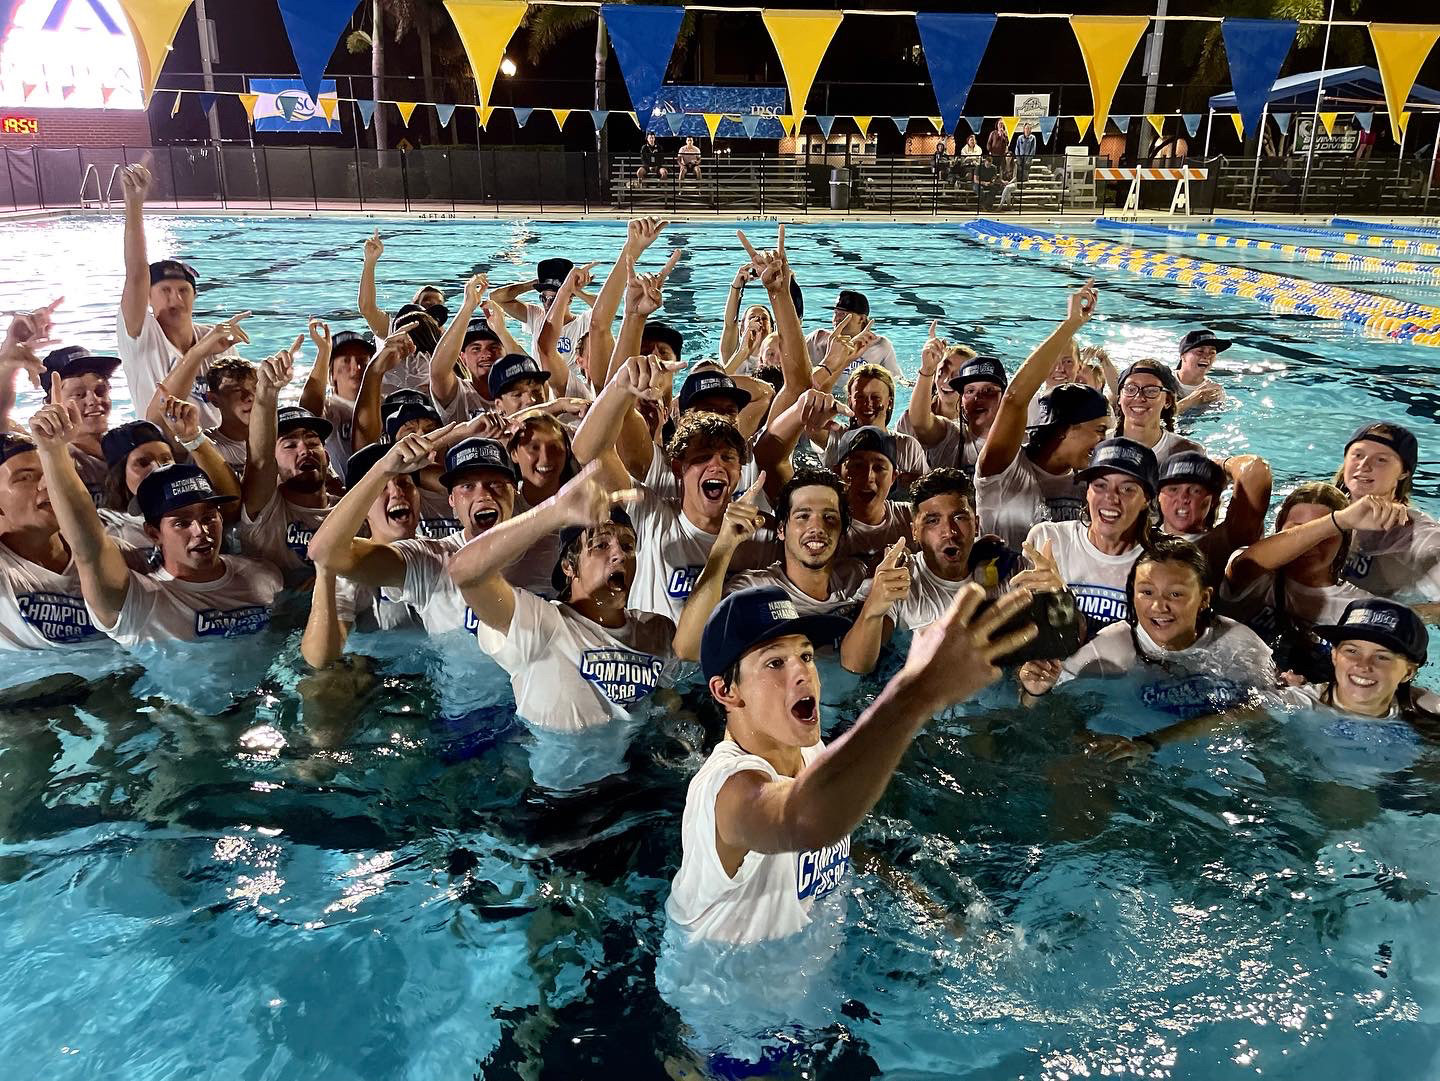 The IRSC men’s swim team now has 48 consecutive titles and 41 for the women’s team.